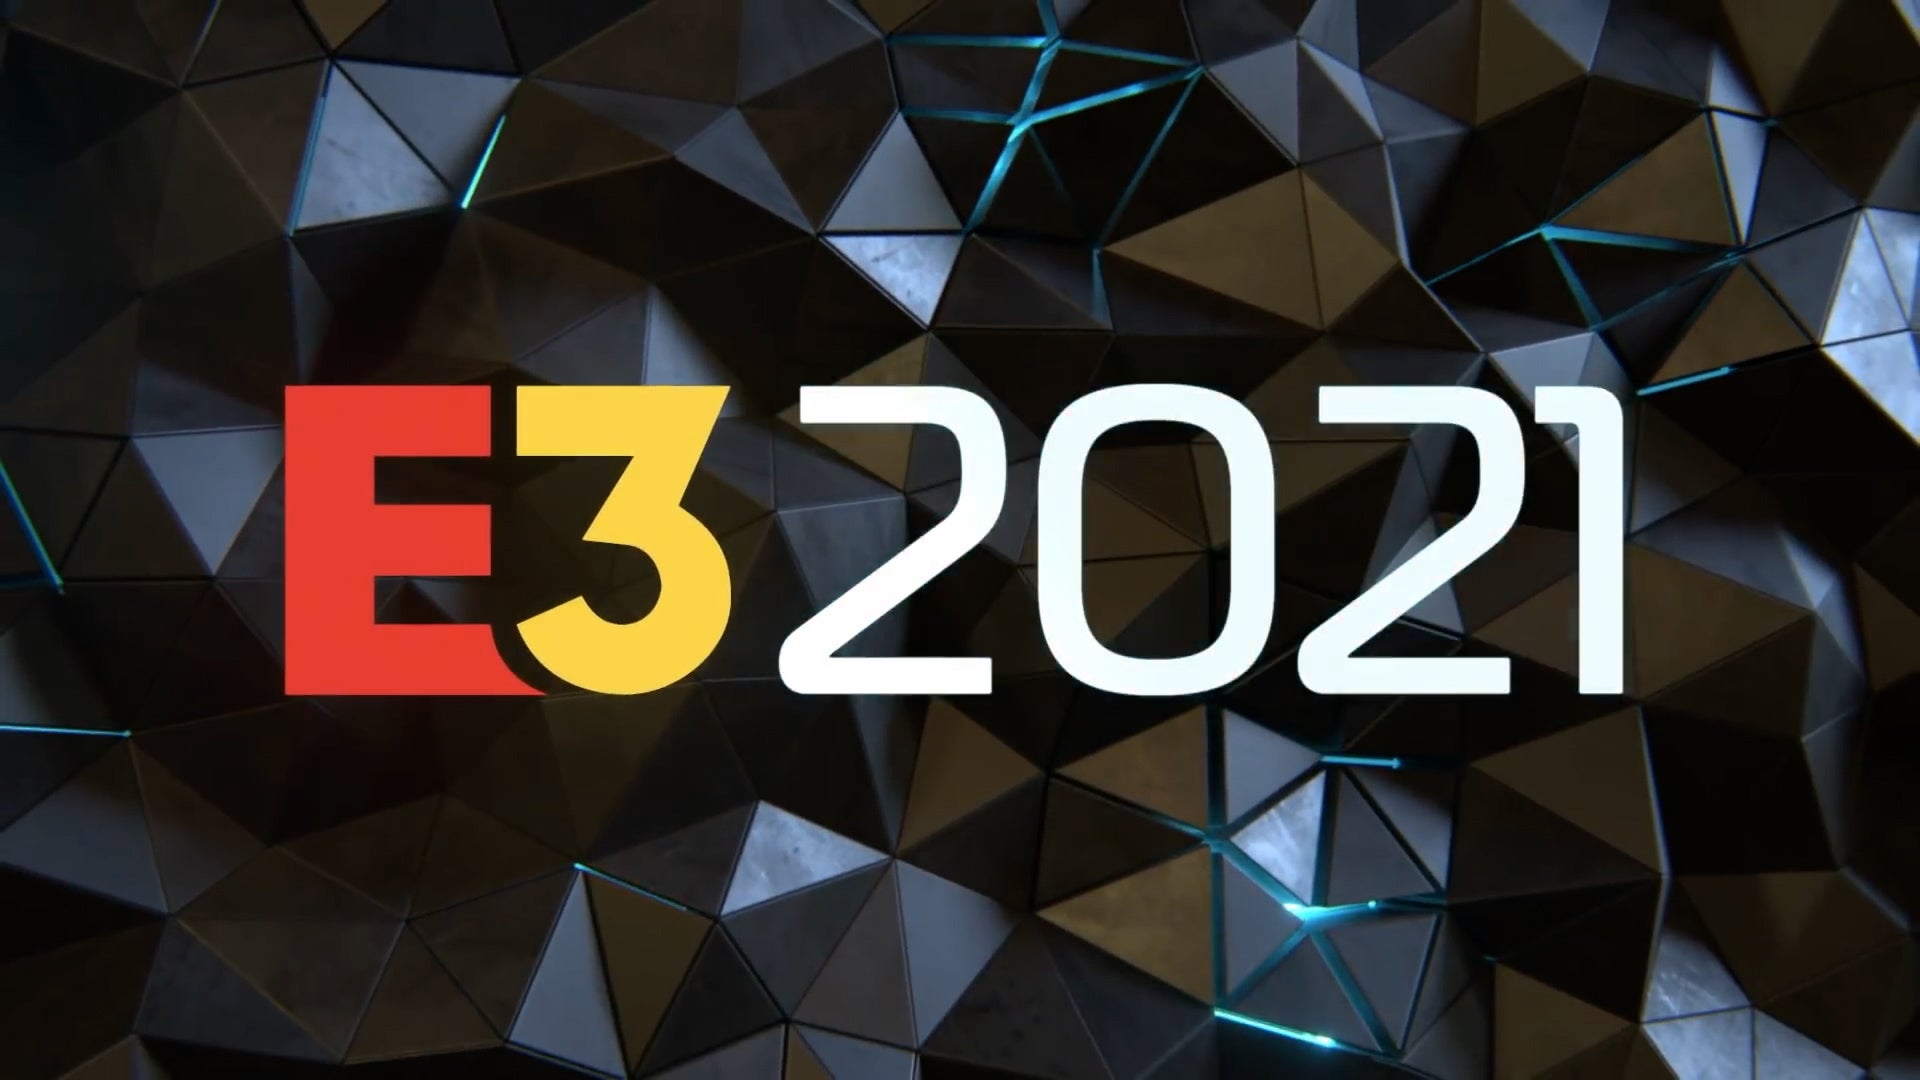 E3 2021 logo in front of a silver-coloured, crystallised background